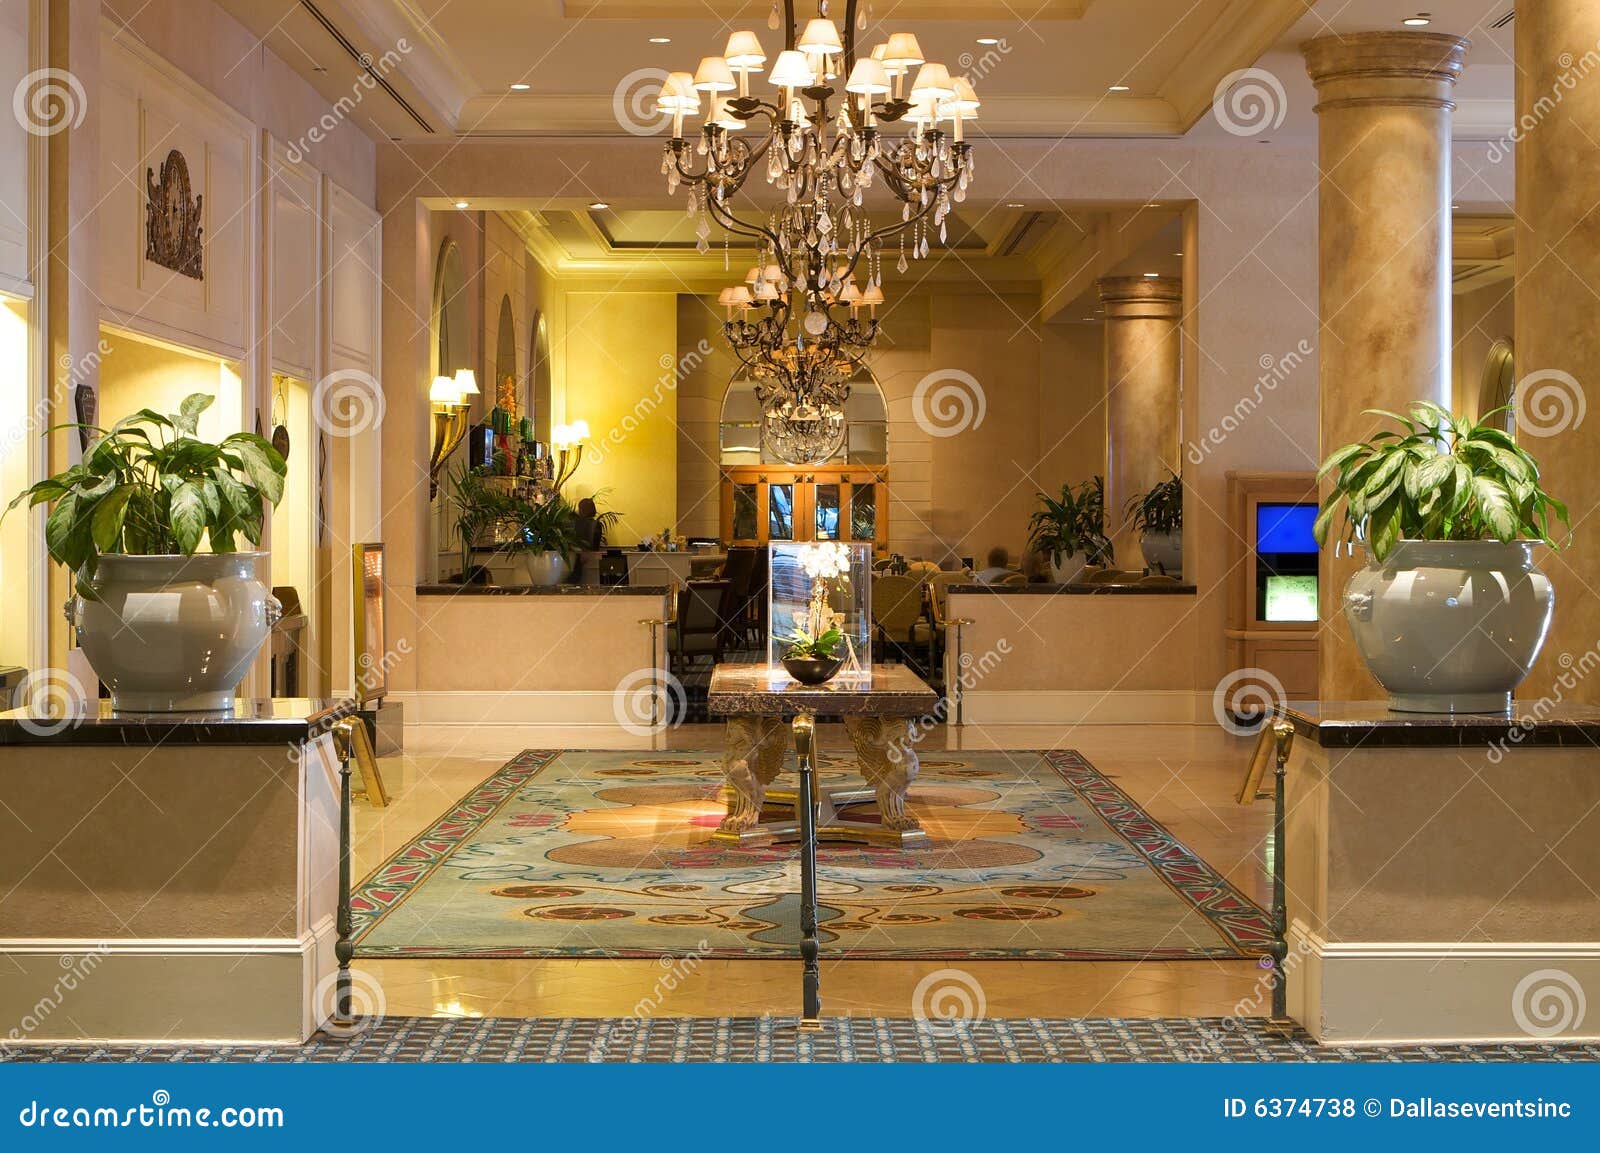 luxurious lobby in an upscale resort